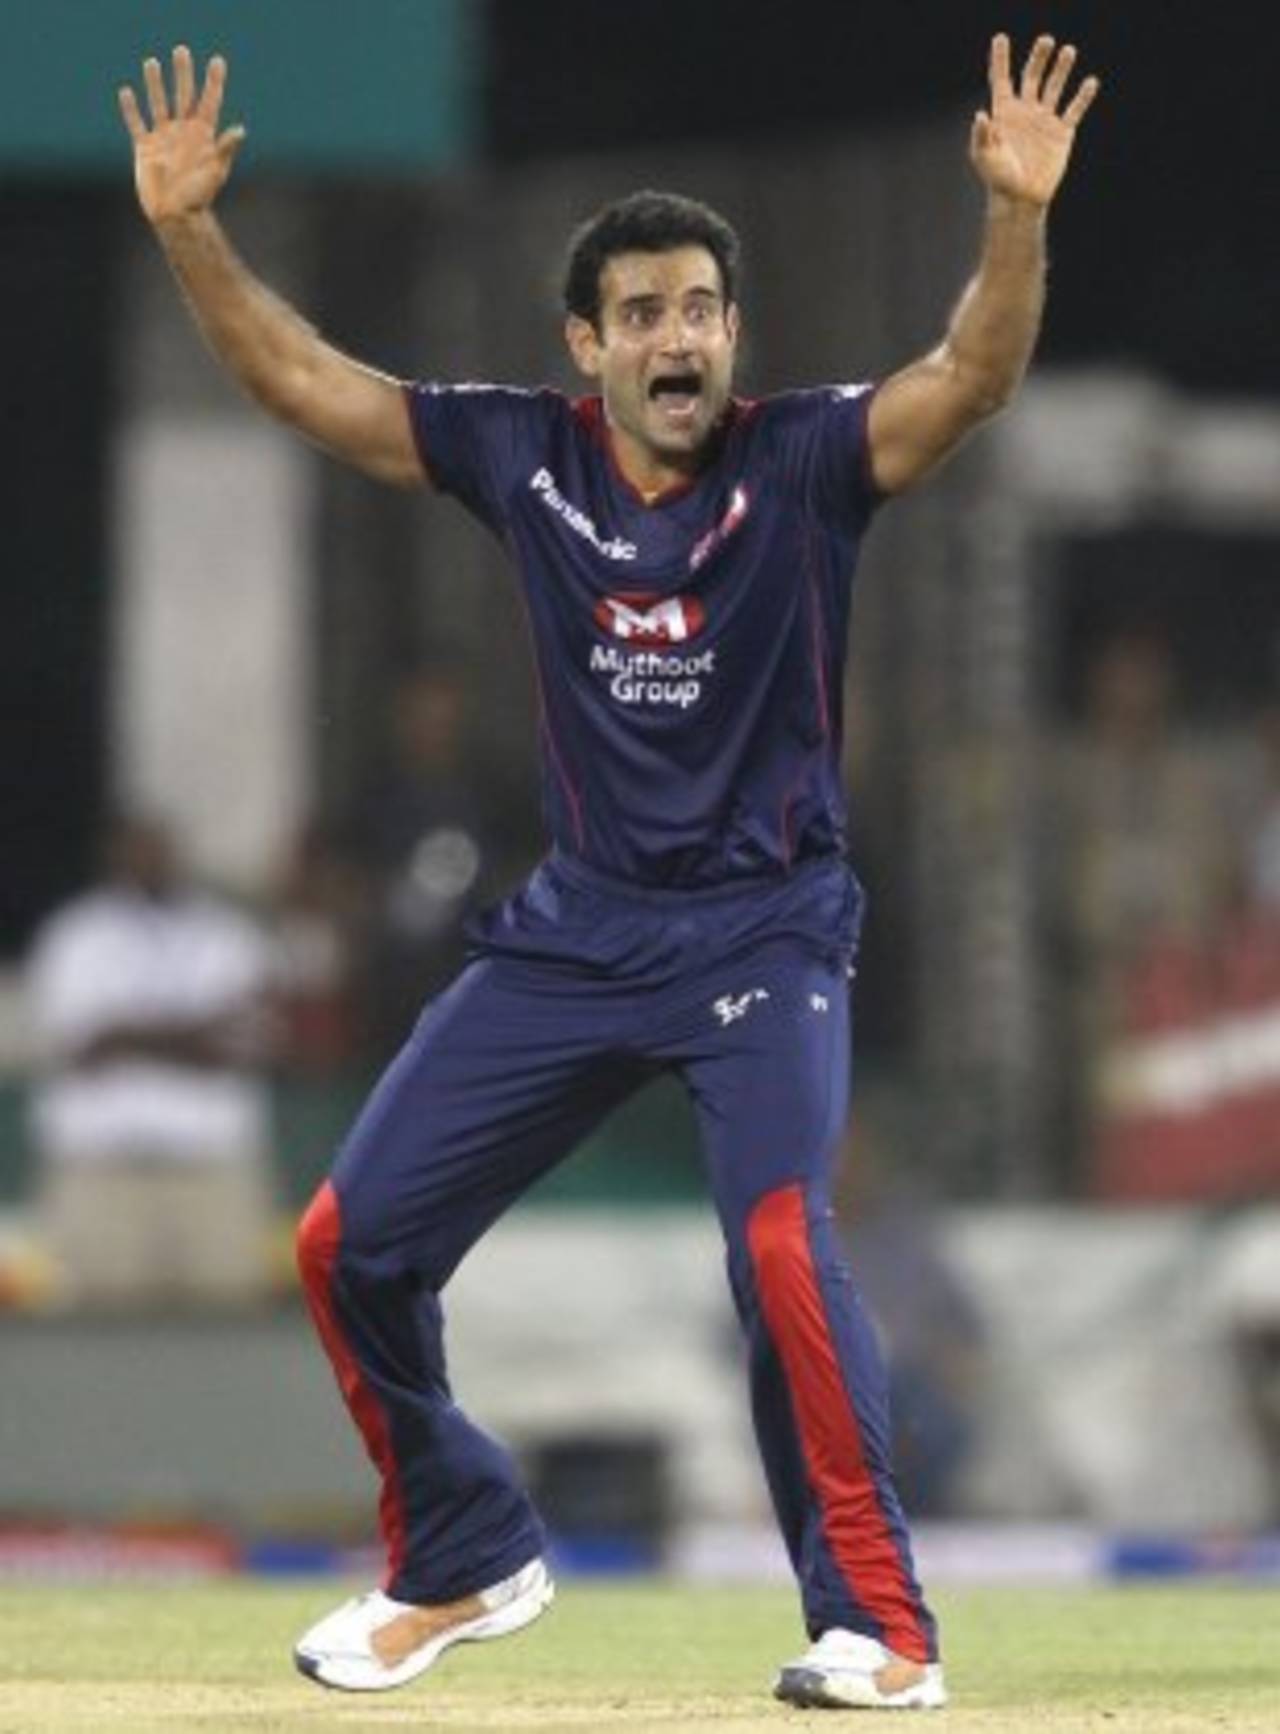 Irfan Pathan appeals for a catch against Aaron Finch, Delhi Daredevils v Pune Warriors, IPL, Raipur, April 28, 2013